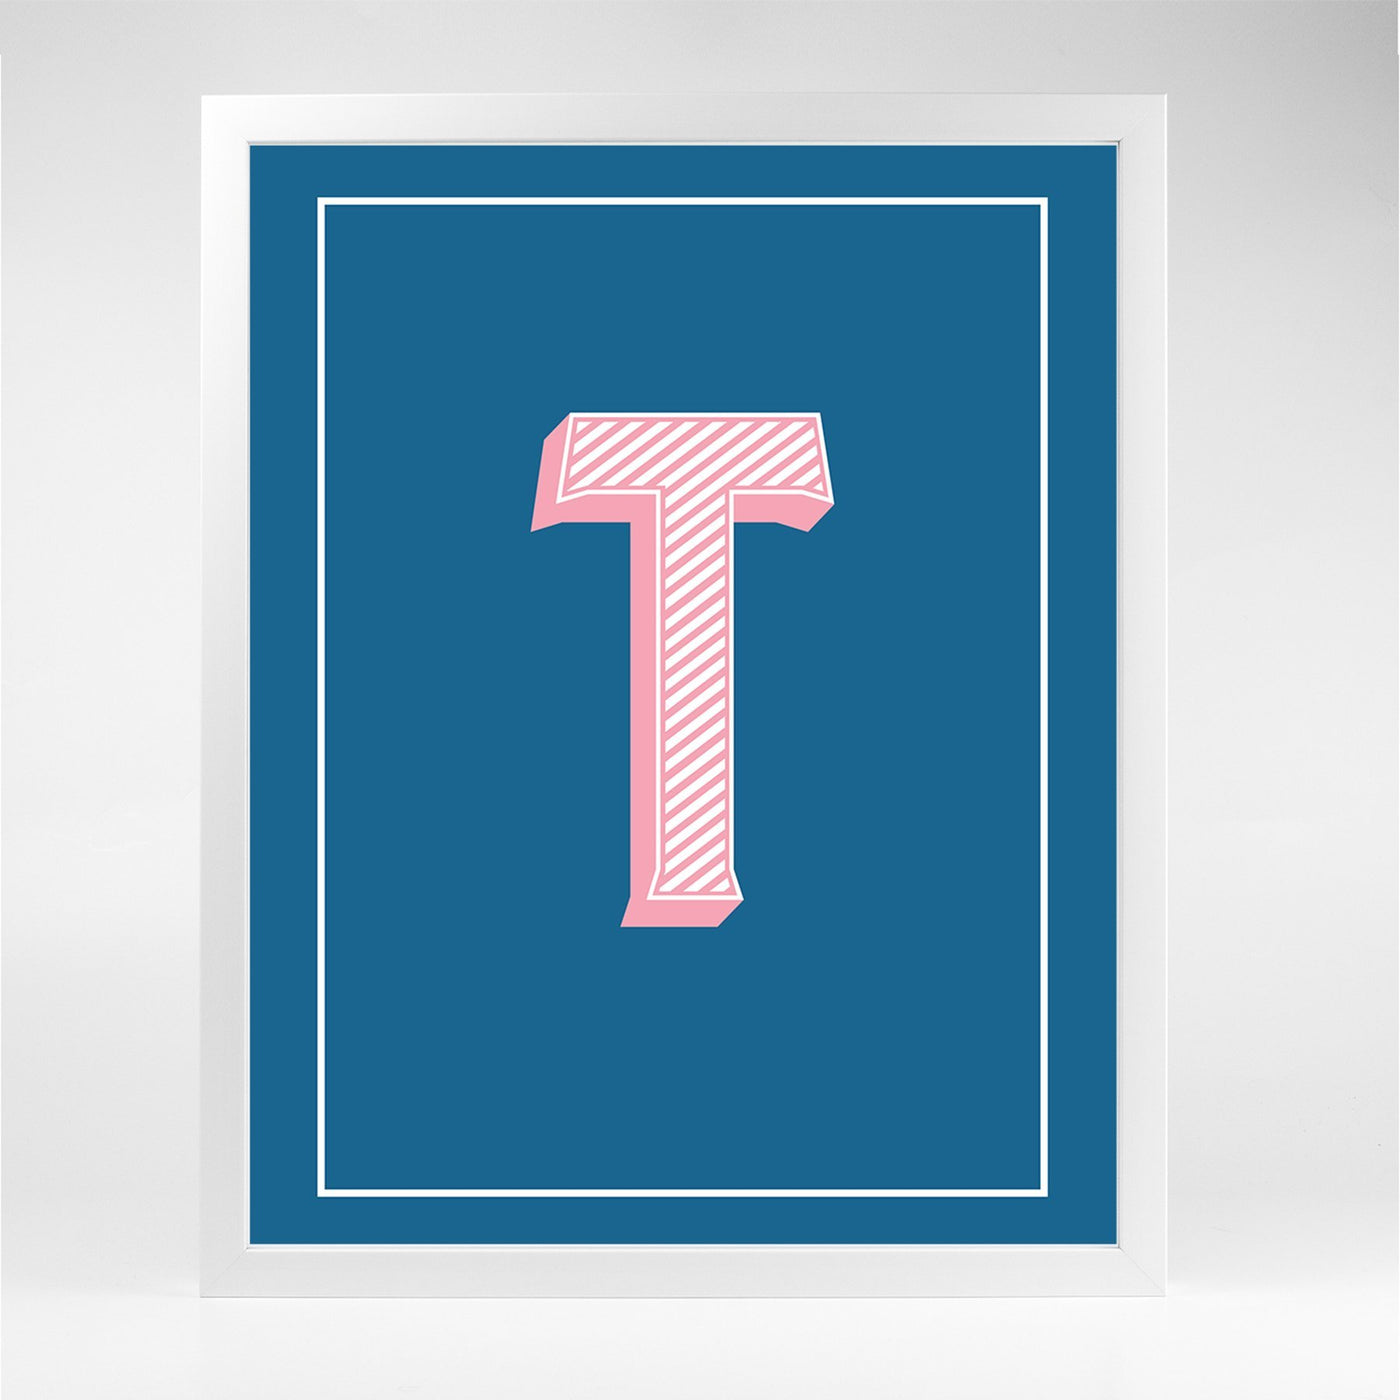 Gallery Prints T The Letter Series Katie Kime